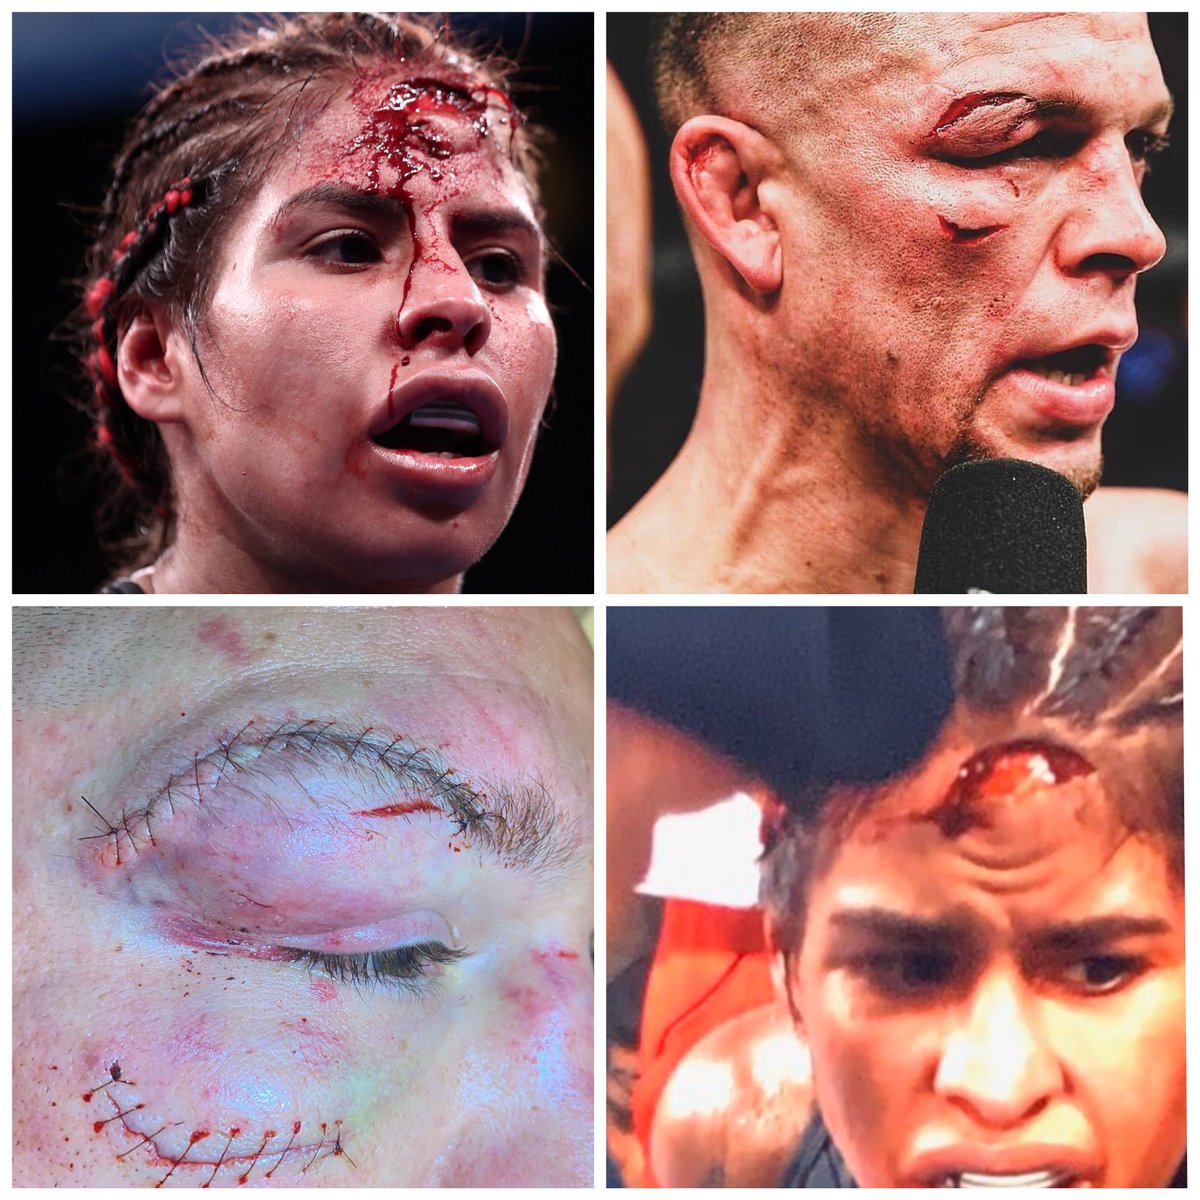 Nate Diaz wasn't the only person to get a fight stopped by cut this weekend. On the undercard of Canelo vs Kovalev Marlen Esparza lost by TD after a crazy cut from a headbutt.
Which was worse?
#UFC244 #CaneloKovalev